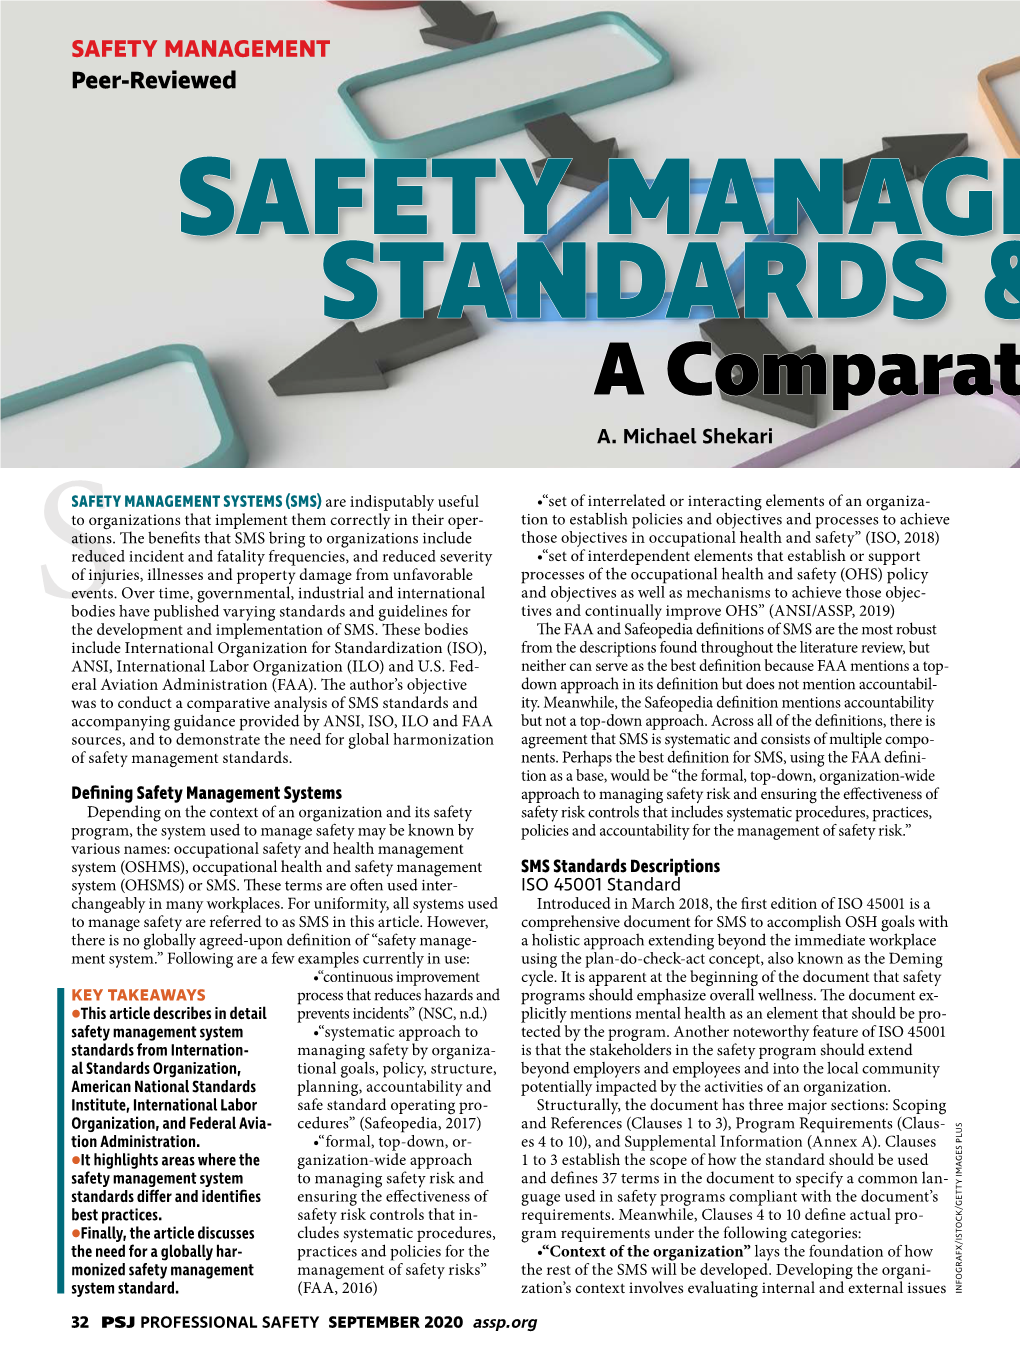 Safety Management Systems Standards and Guidelines